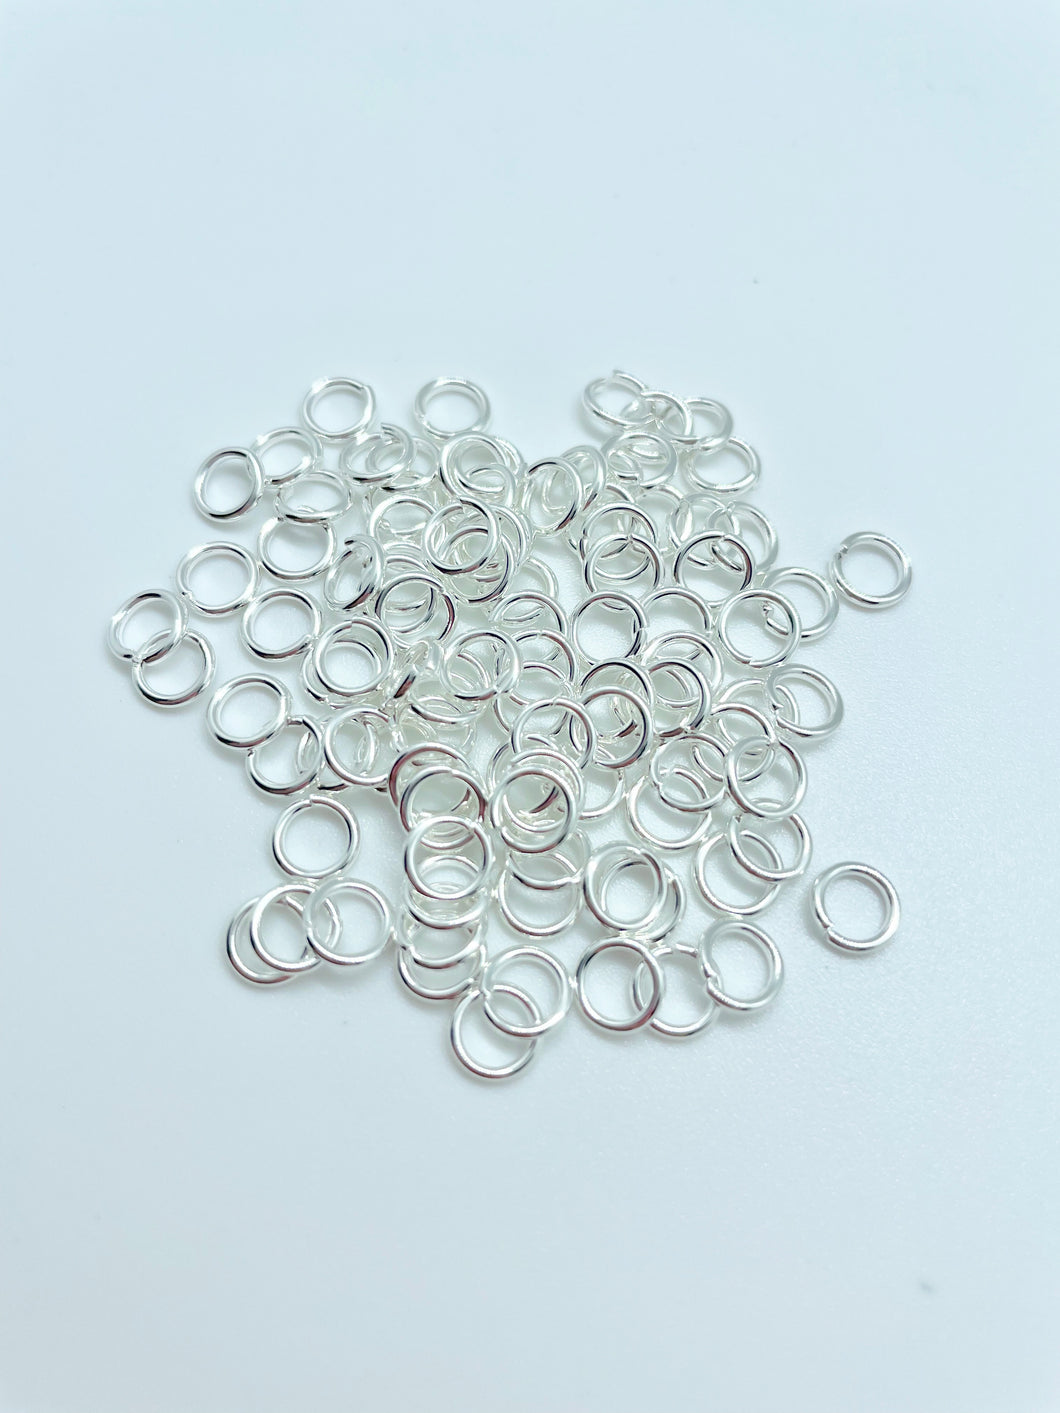 6mm Bright Silver Jump Rings